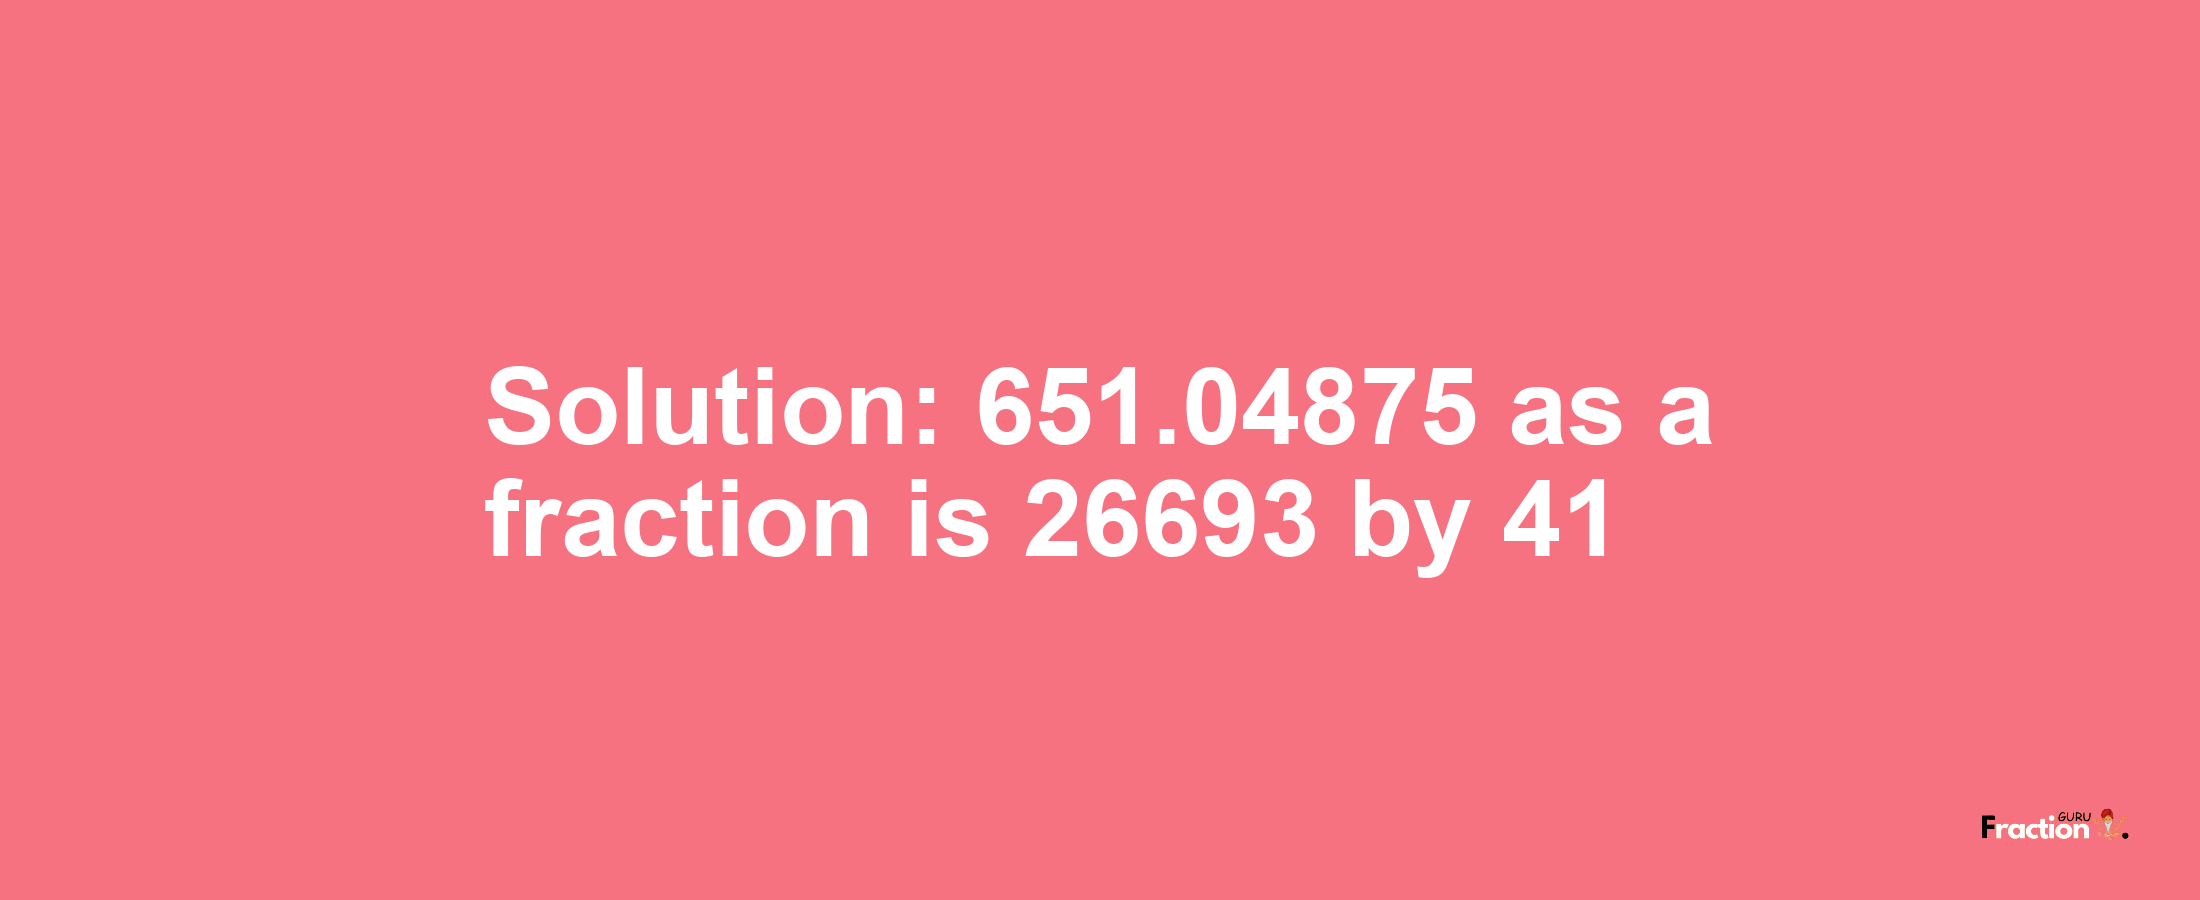 Solution:651.04875 as a fraction is 26693/41